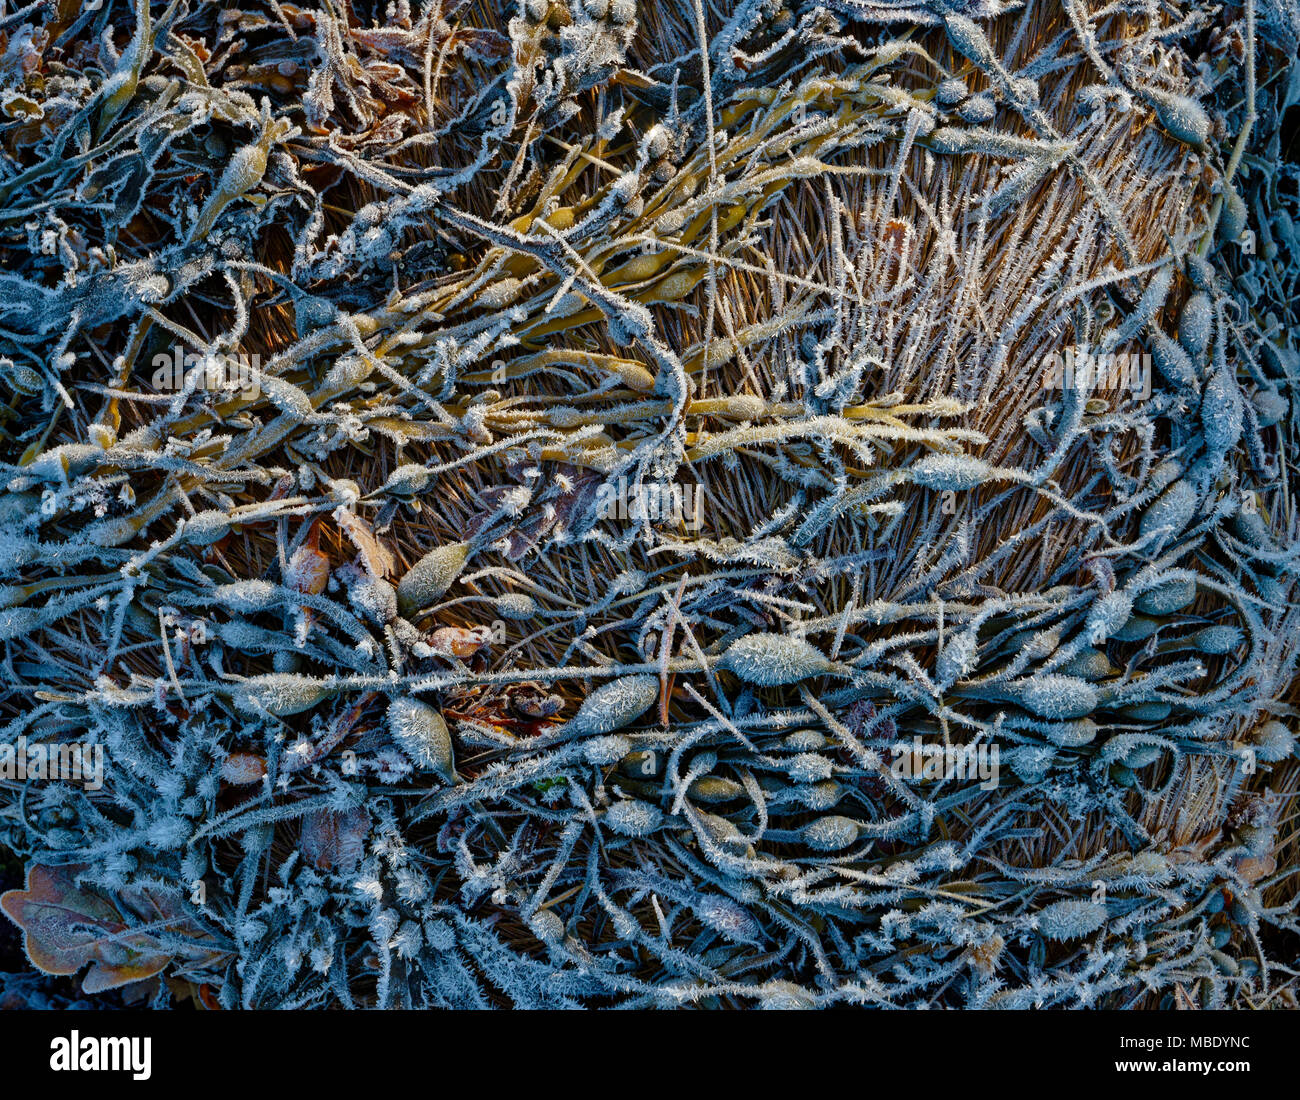 A close-up view of seaweed and kelp along the shores of Loch Sunart in the Scottish Highlands. Stock Photo